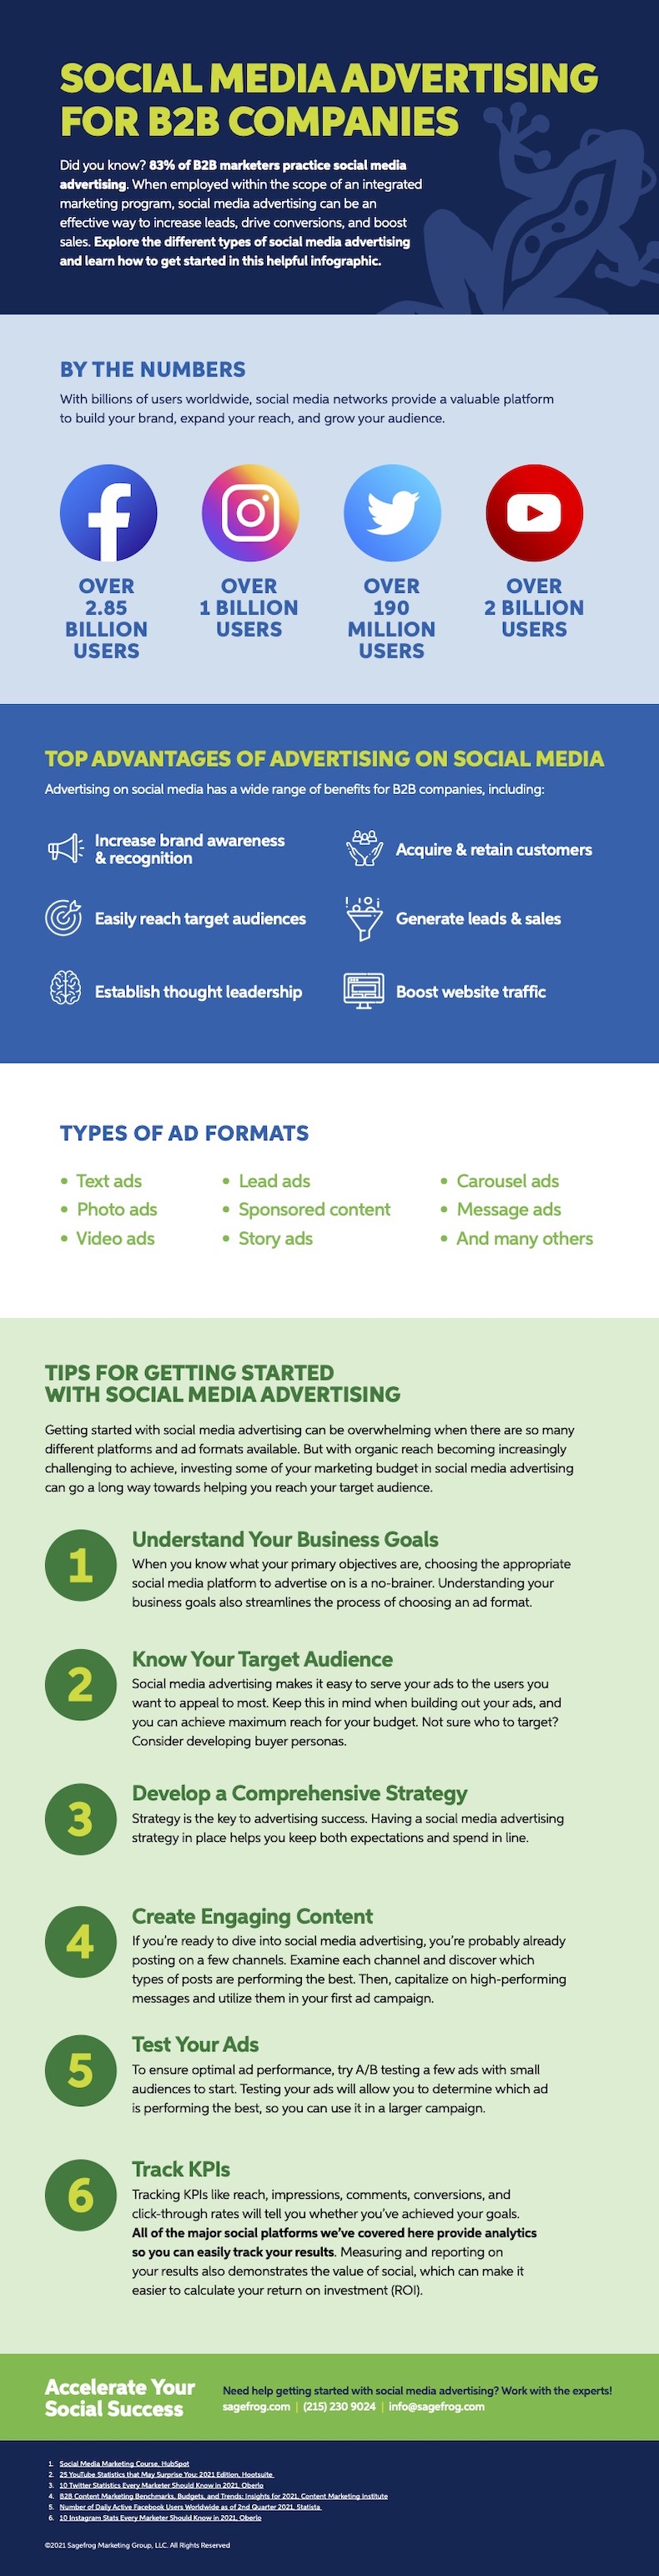 Should Your B2B Use Social Media Advertising - infographic